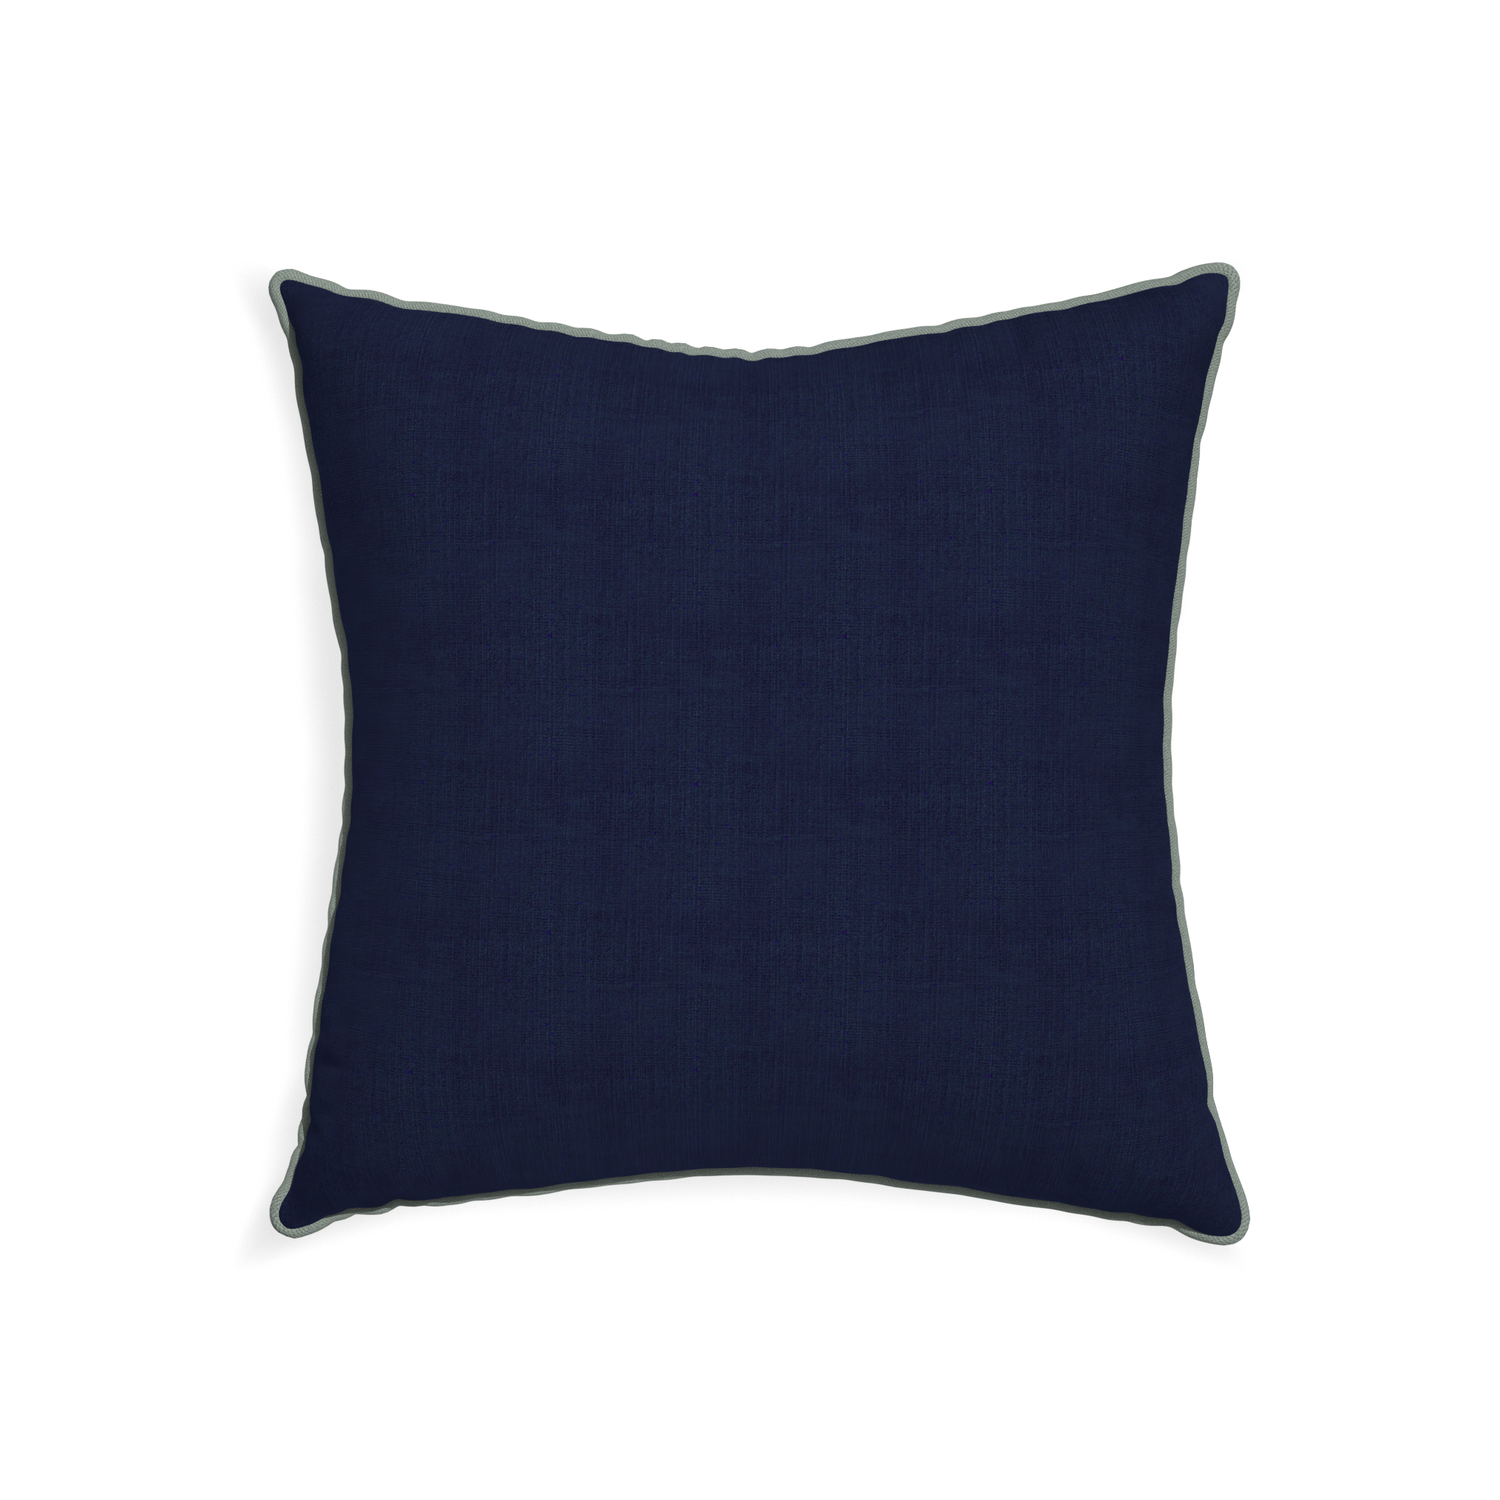 22-square midnight custom navy bluepillow with sage piping on white background